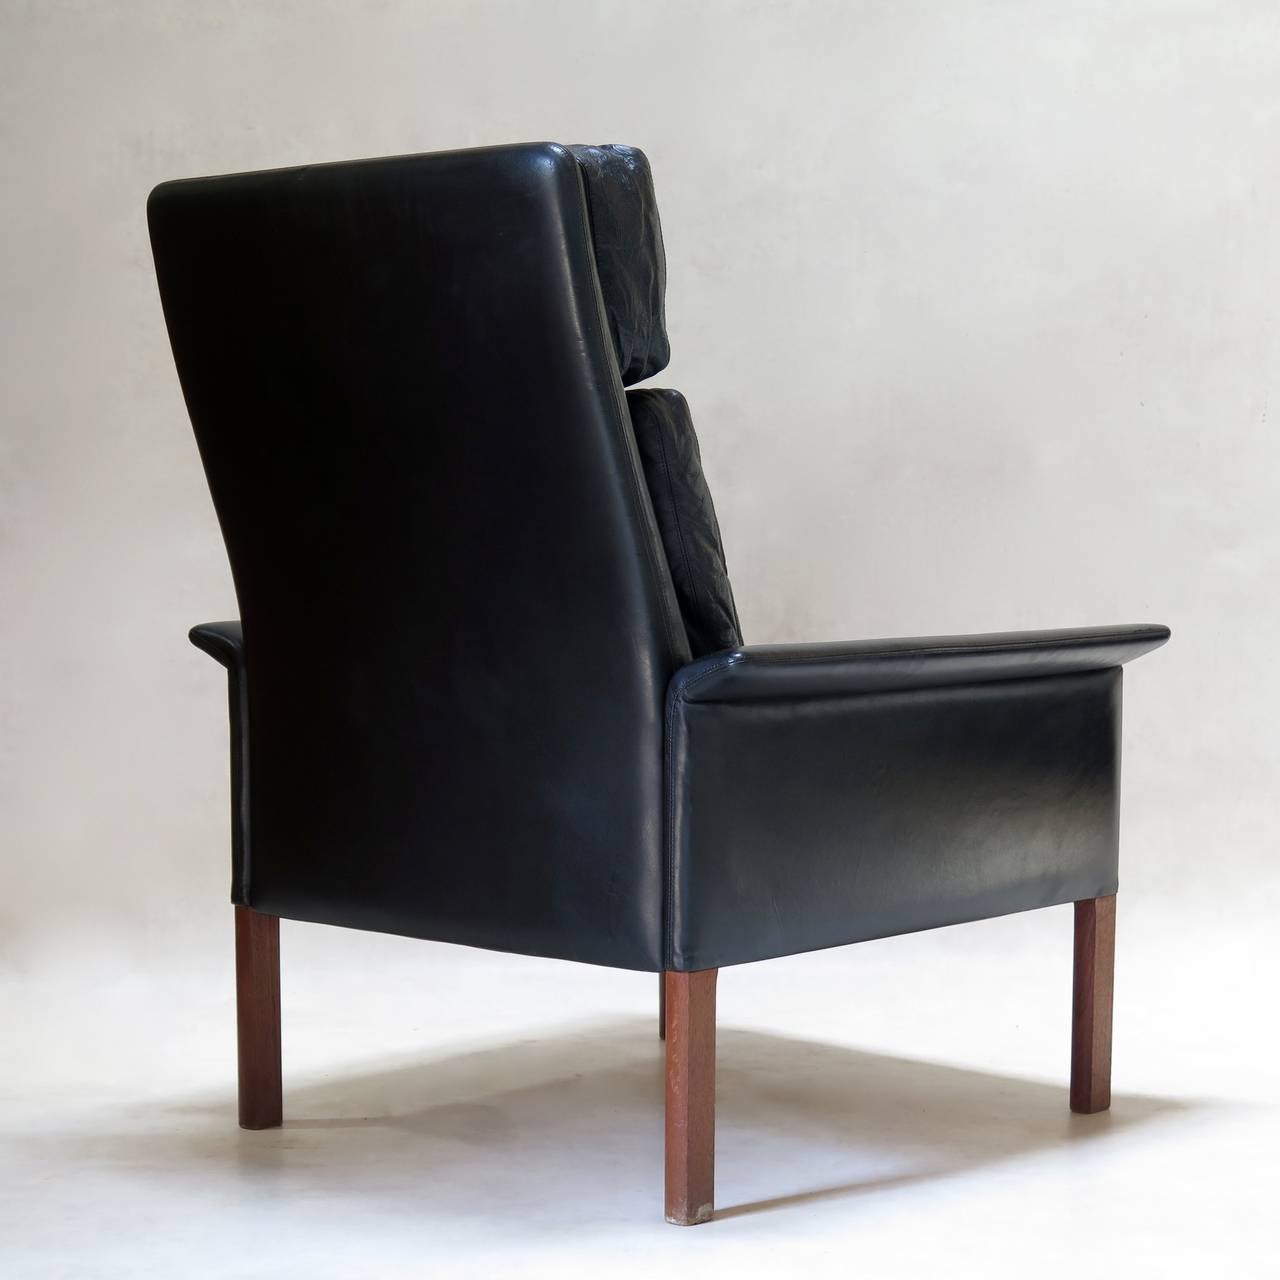 20th Century Pair of Hans Olsen Leather & Rosewood Armchairs - Denmark, Circa 1960s For Sale